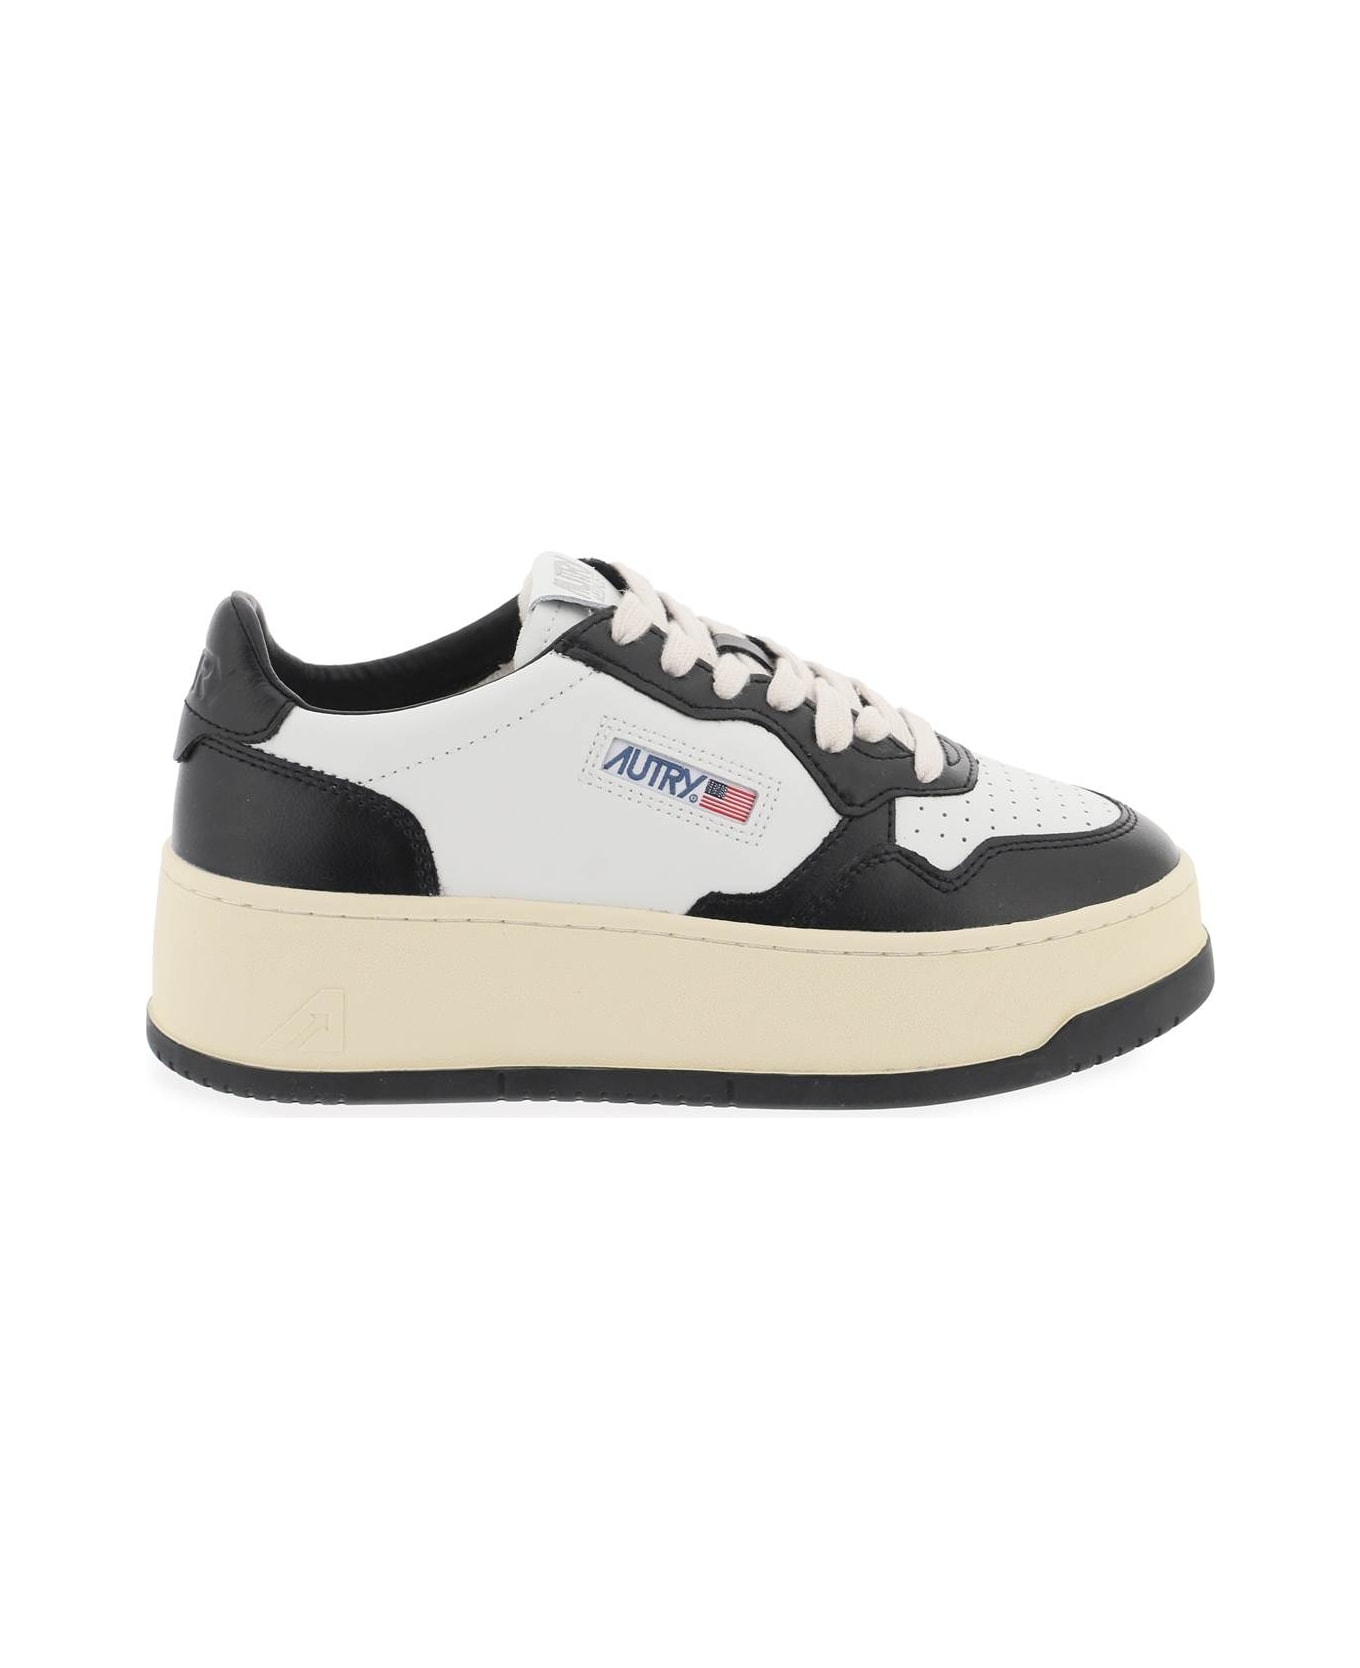 Autry Medalist Low Sneakers - WHITE BLACK (White)